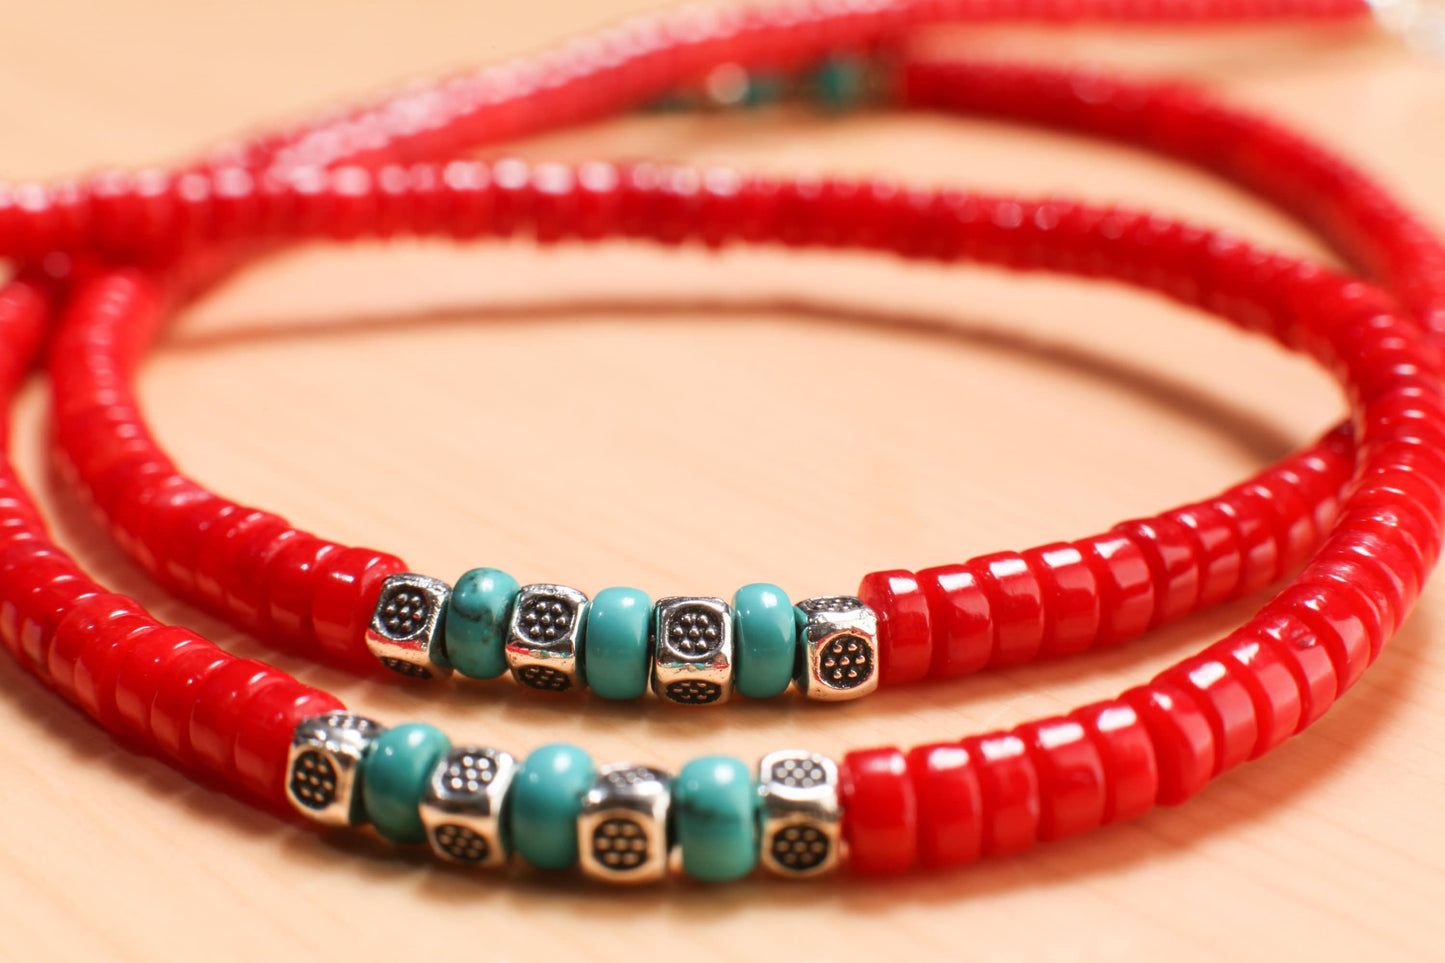 Genuine AAA Red Bamboo 4mm Coral Heishe and Turquoise 4mm Rondelle Spacers Silver Necklace, Coral heishi Necklace16&quot;- 30&quot; for Man and Woman.